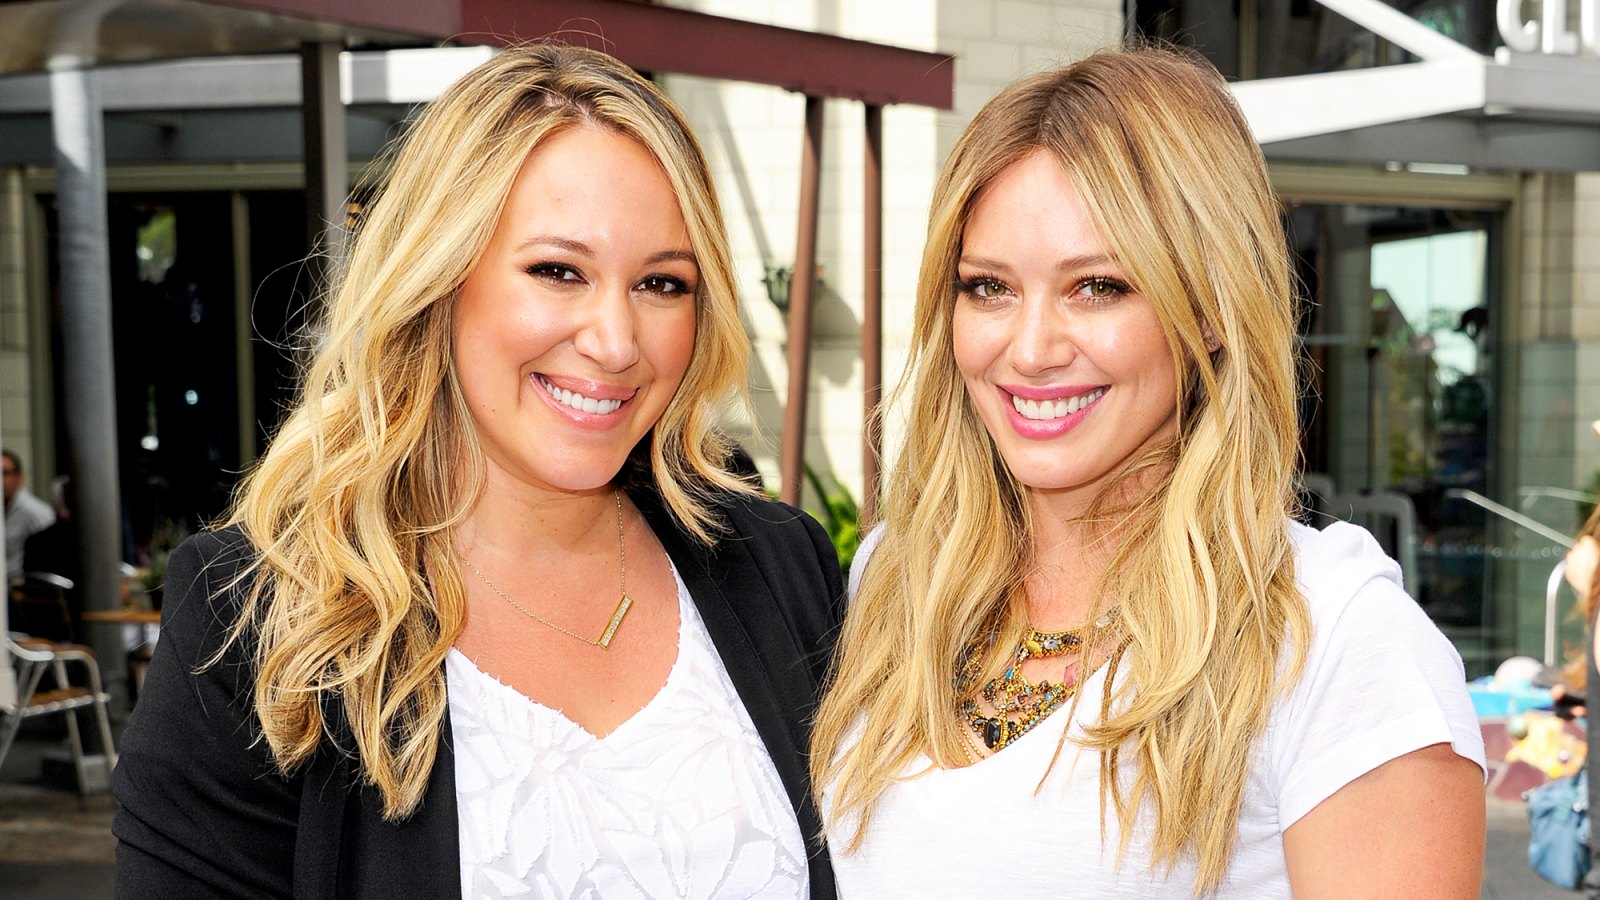 Haylie Duff and Hilary Duff visit ‘Extra‘ at Universal Studios Hollywood on August 6, 2015 in Universal City, California.